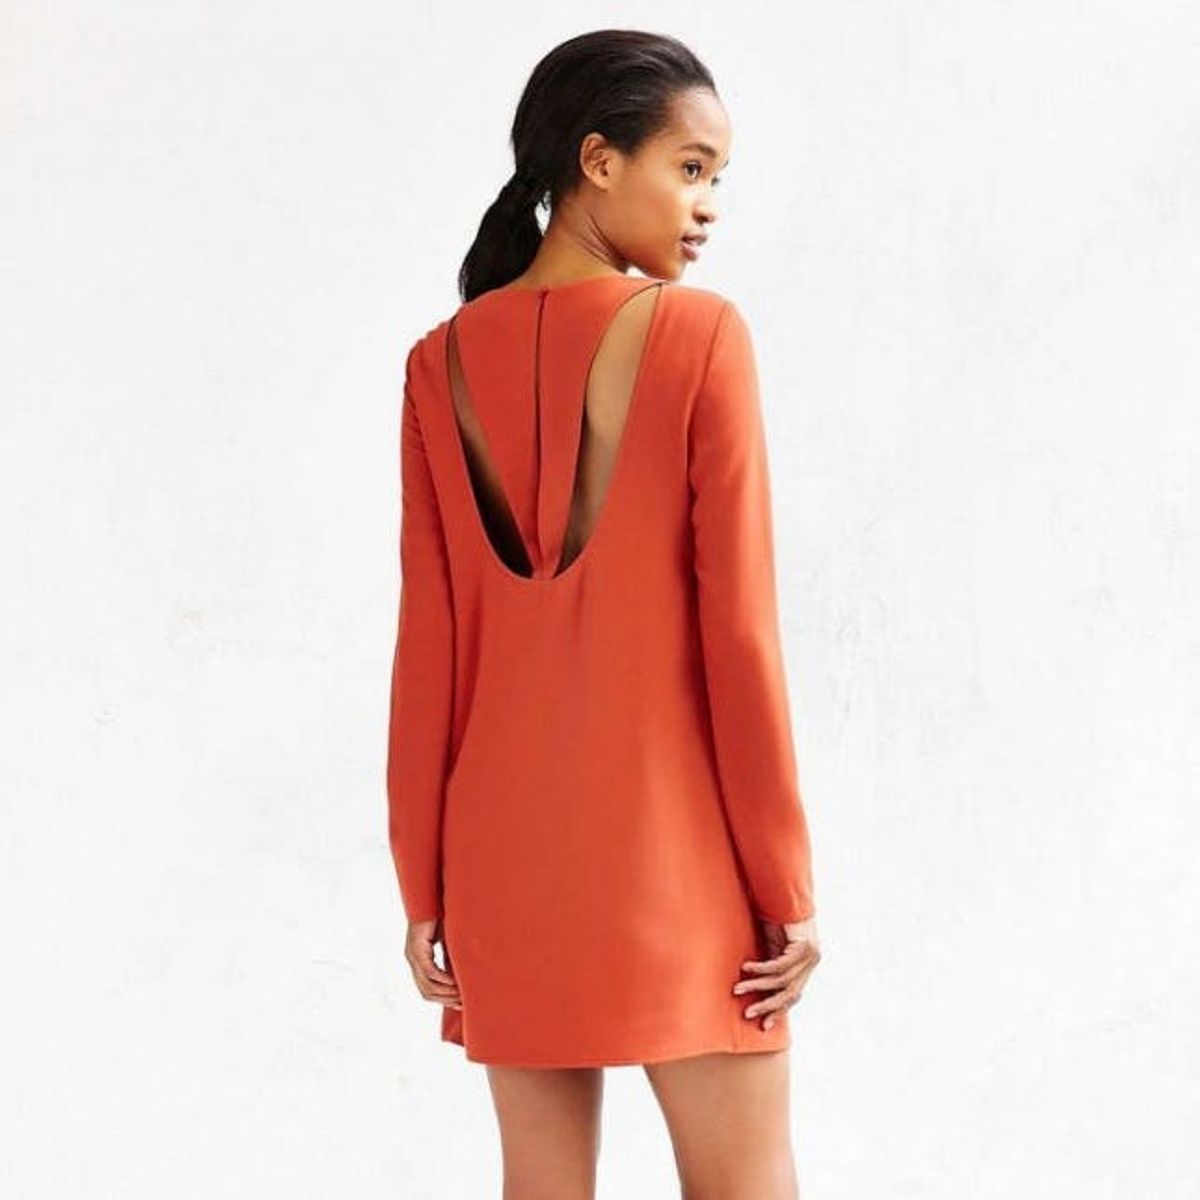 These 16 Dresses Are All About the Party in the Back